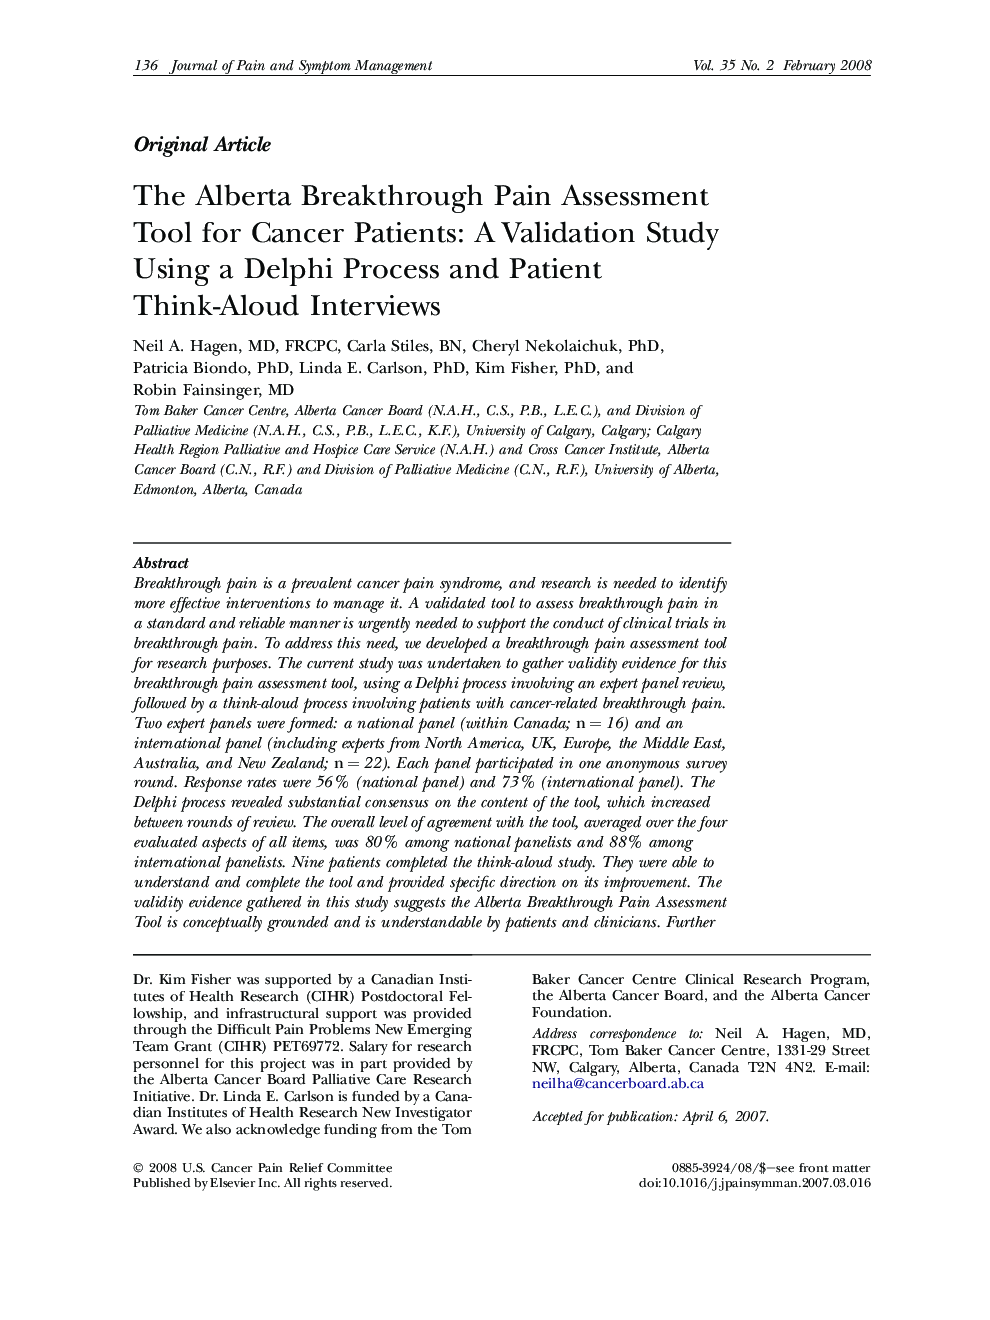 The Alberta Breakthrough Pain Assessment Tool for Cancer Patients: A Validation Study Using a Delphi Process and Patient Think-Aloud Interviews 